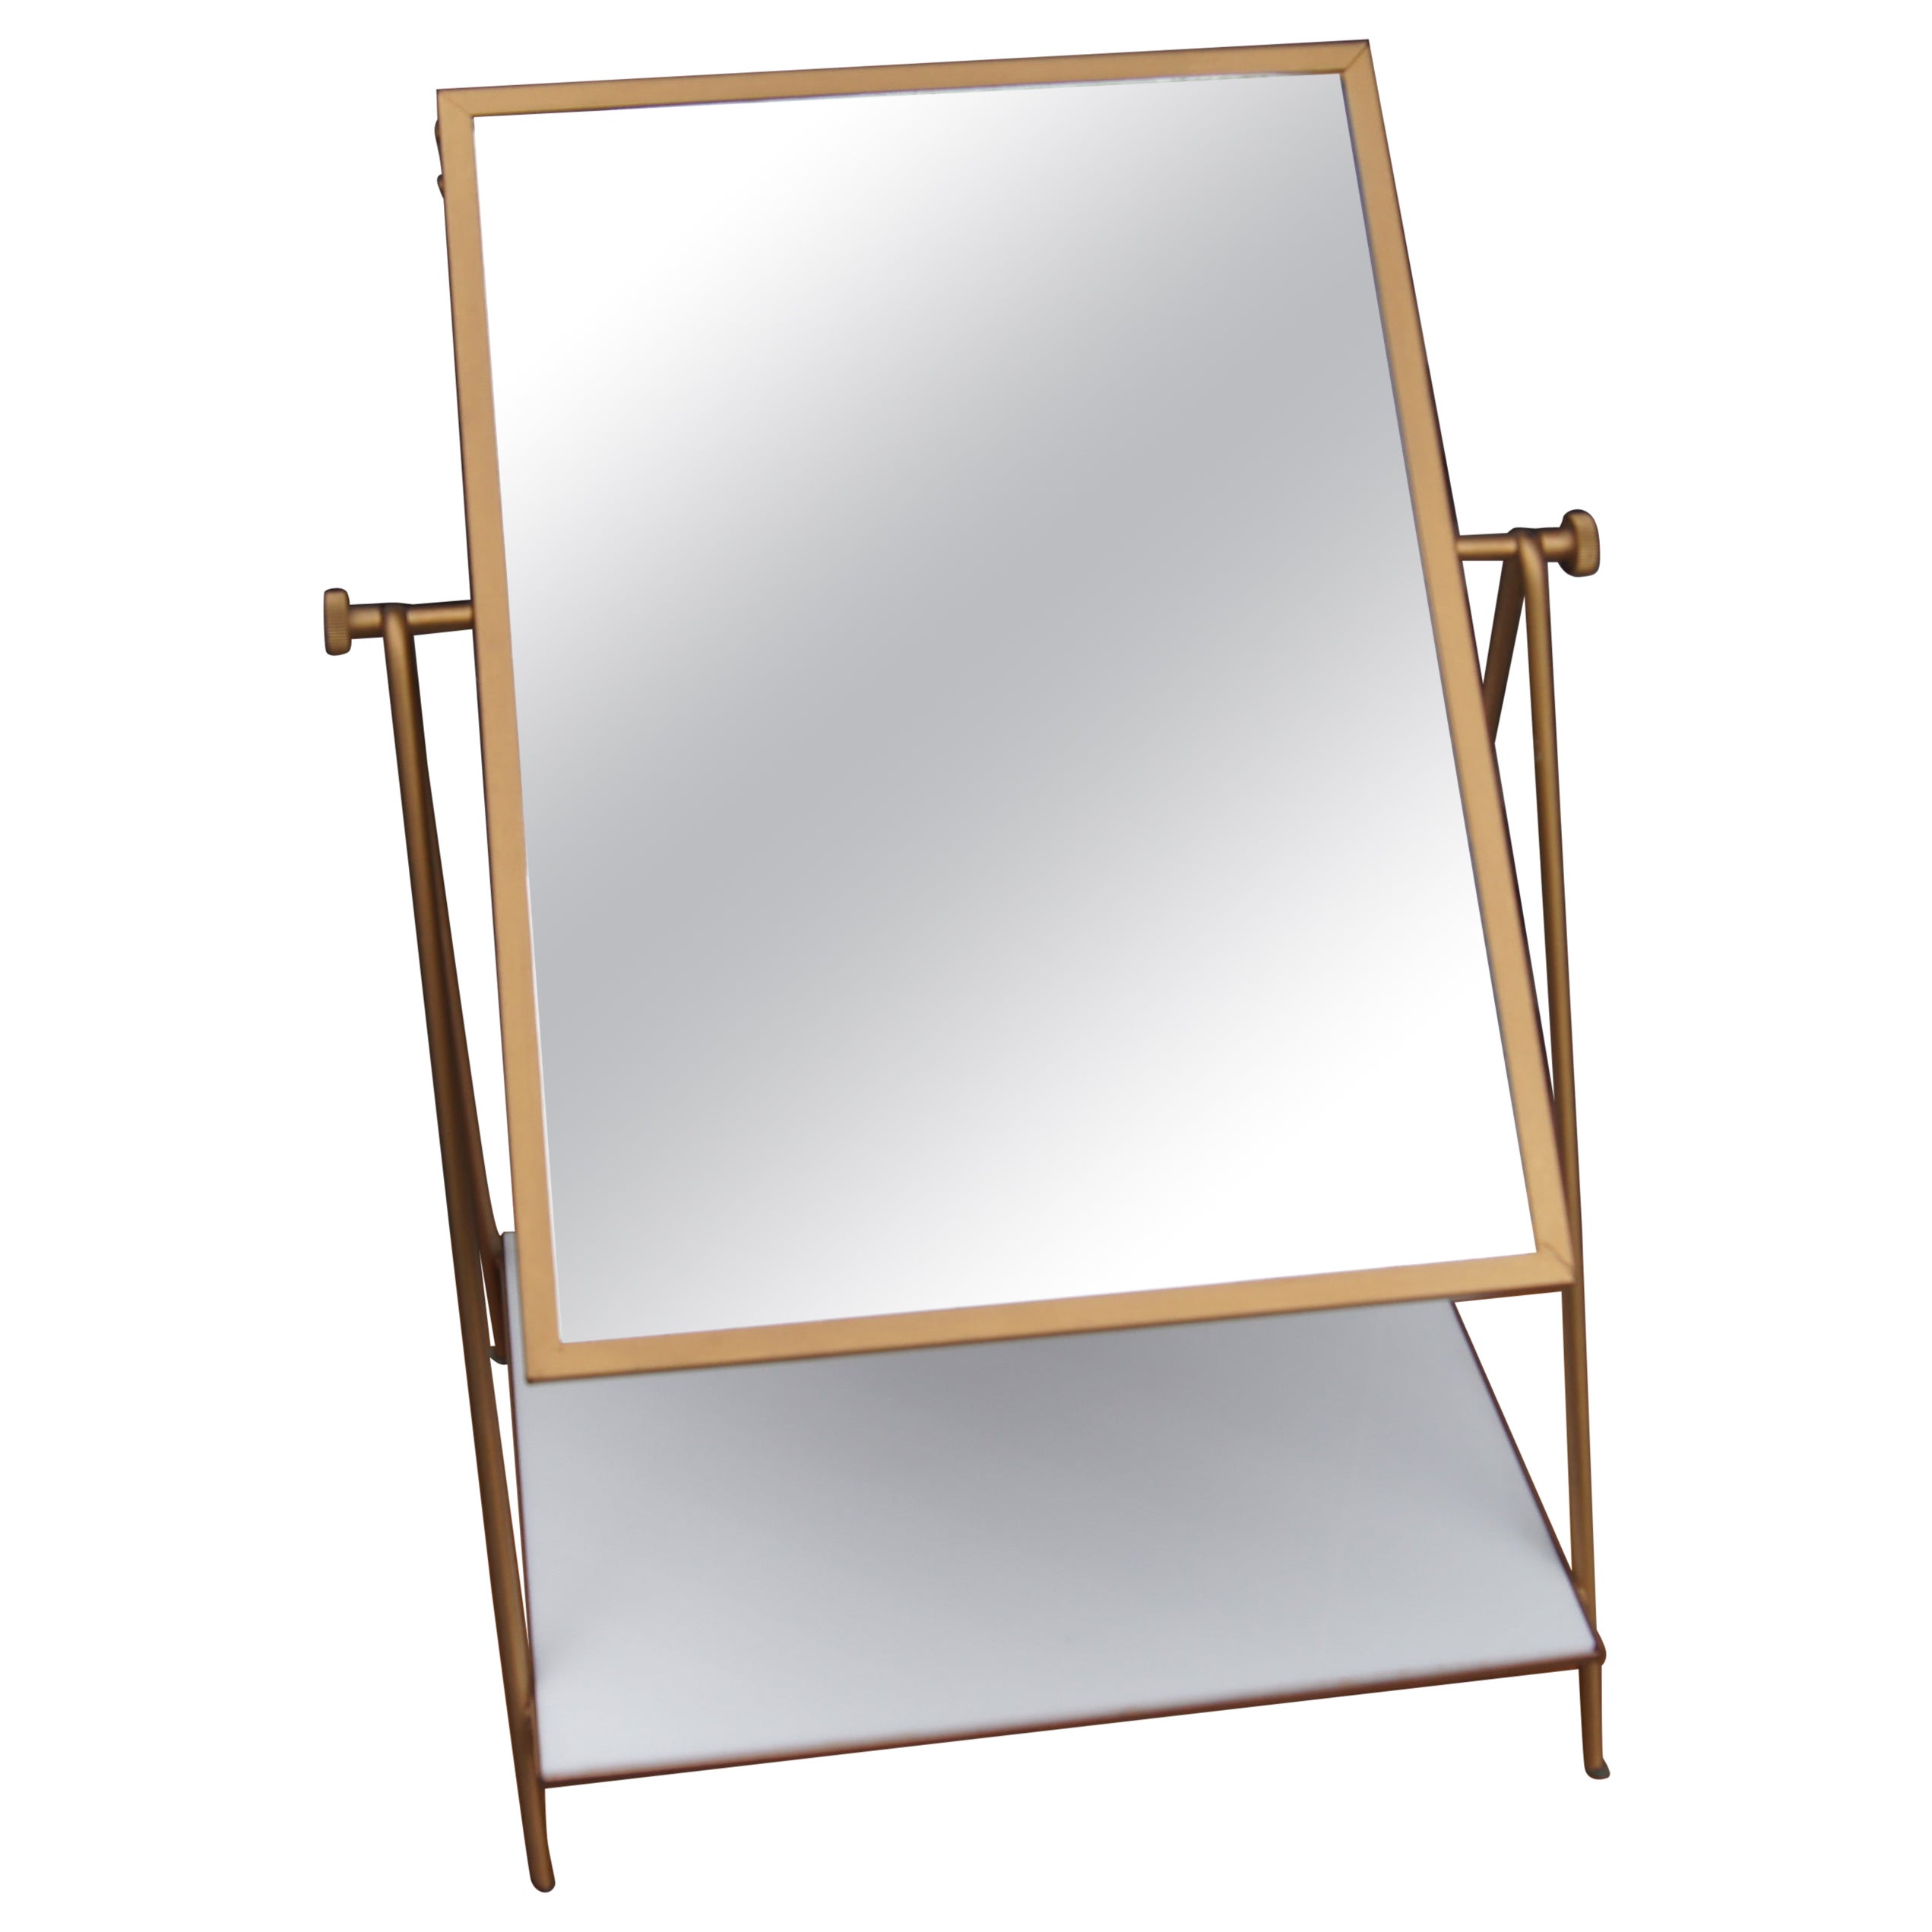 Swiveling Table Mirror with Shelf by Paul McCobb for Bryce Originals